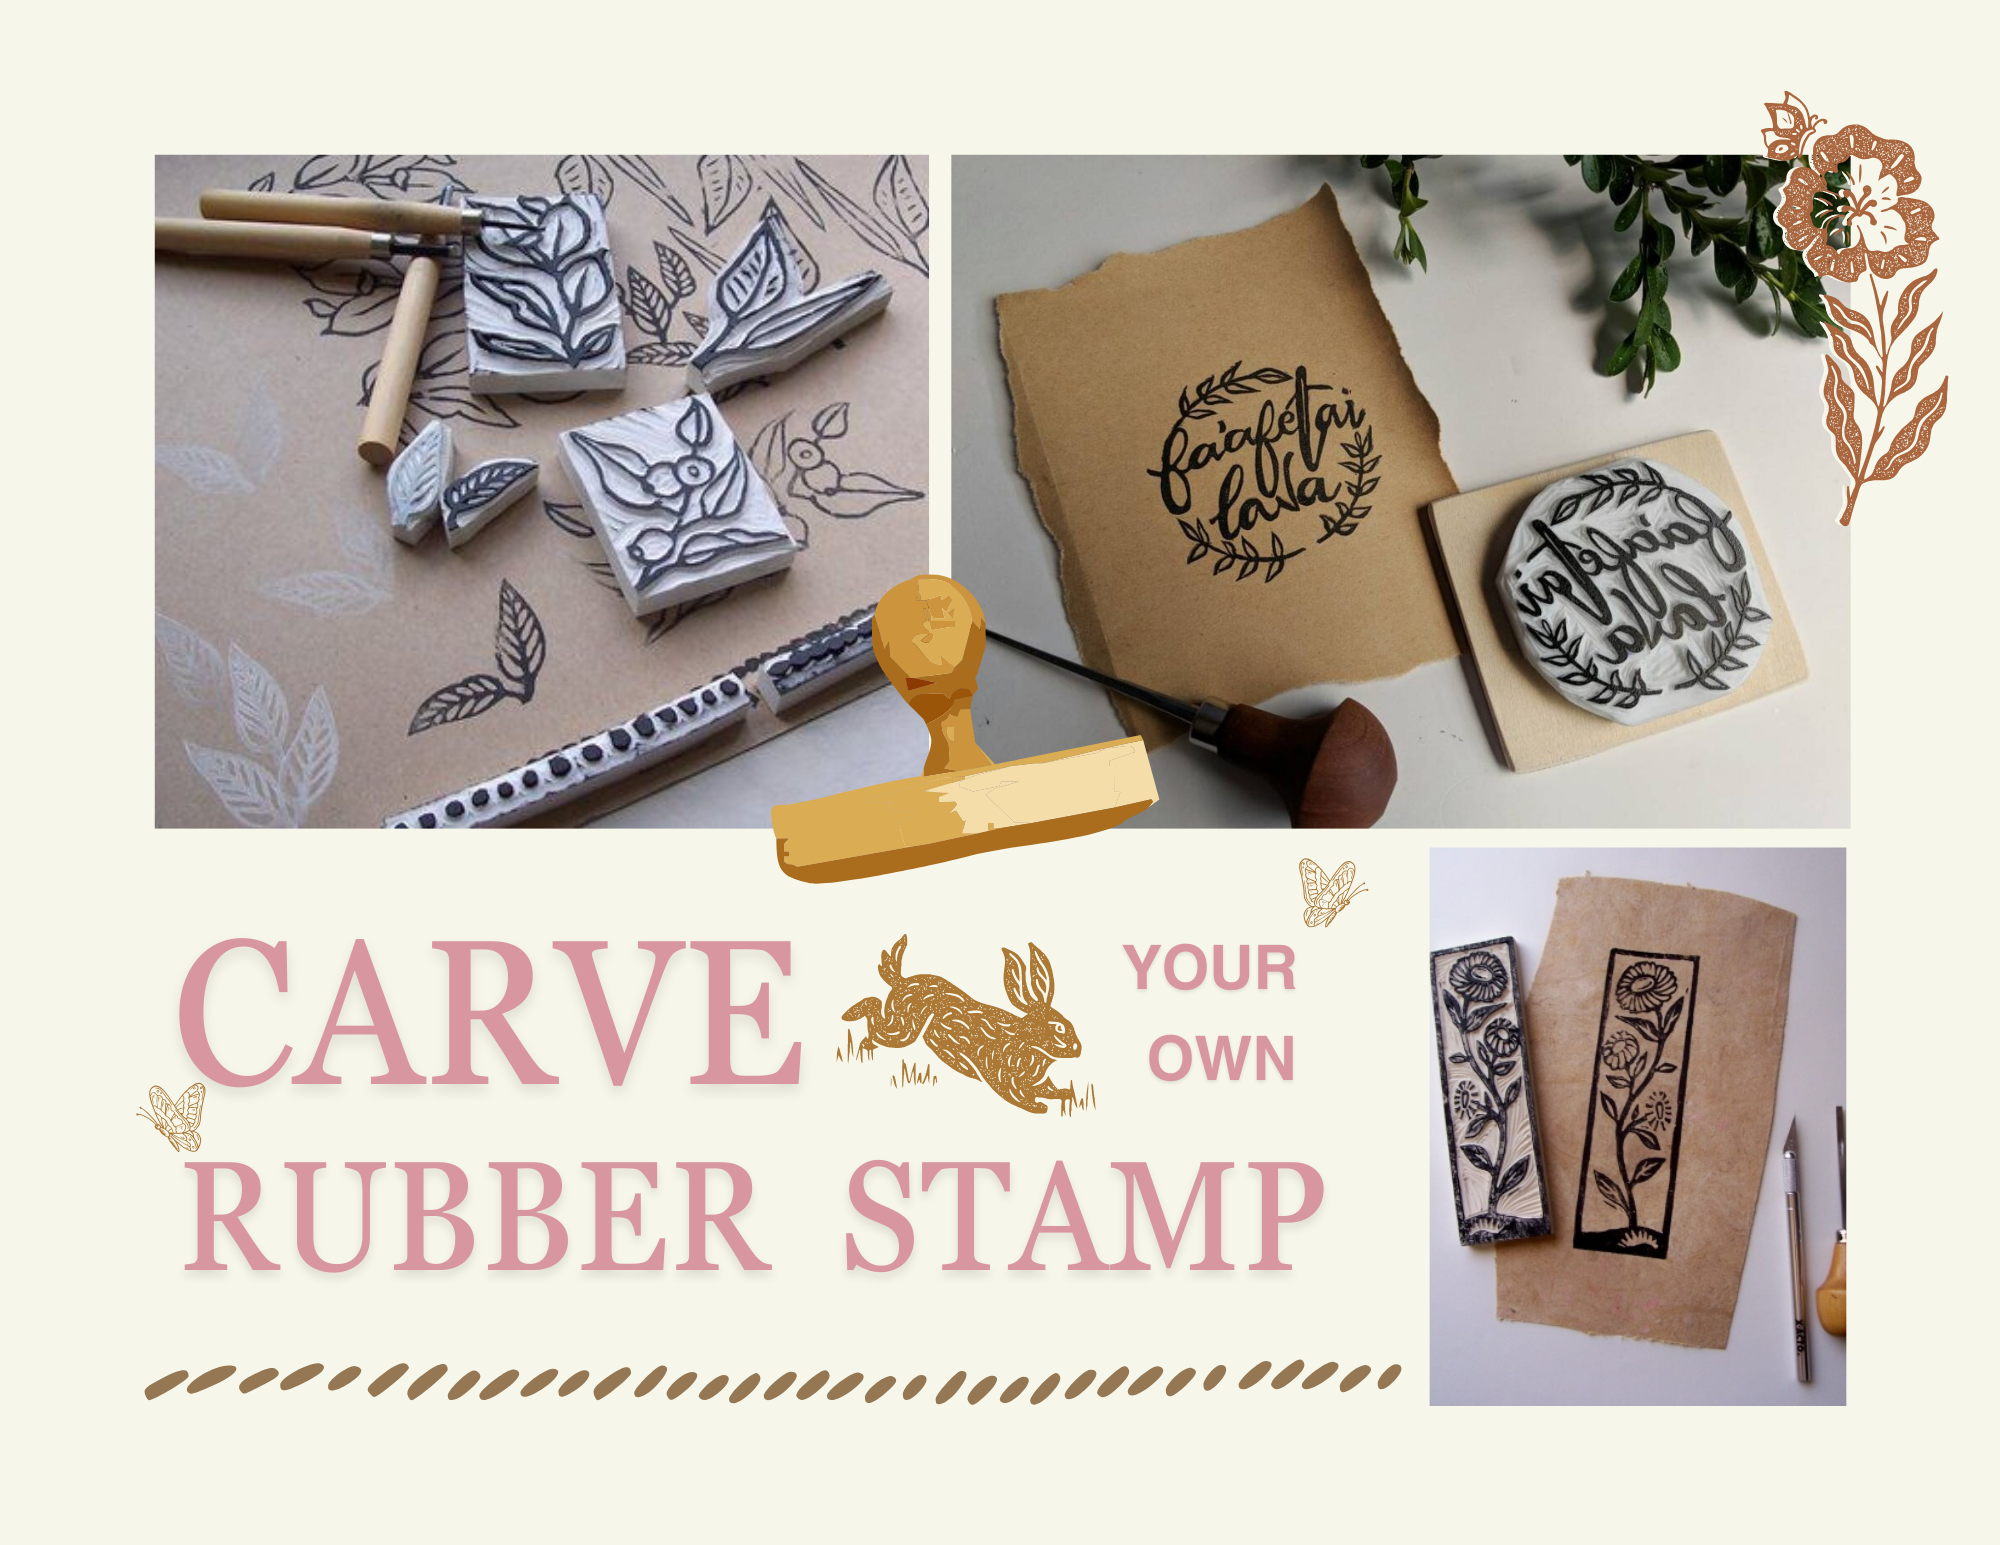 Carve your own rubber stamp. Images of flowers and leaves carved into rubber.